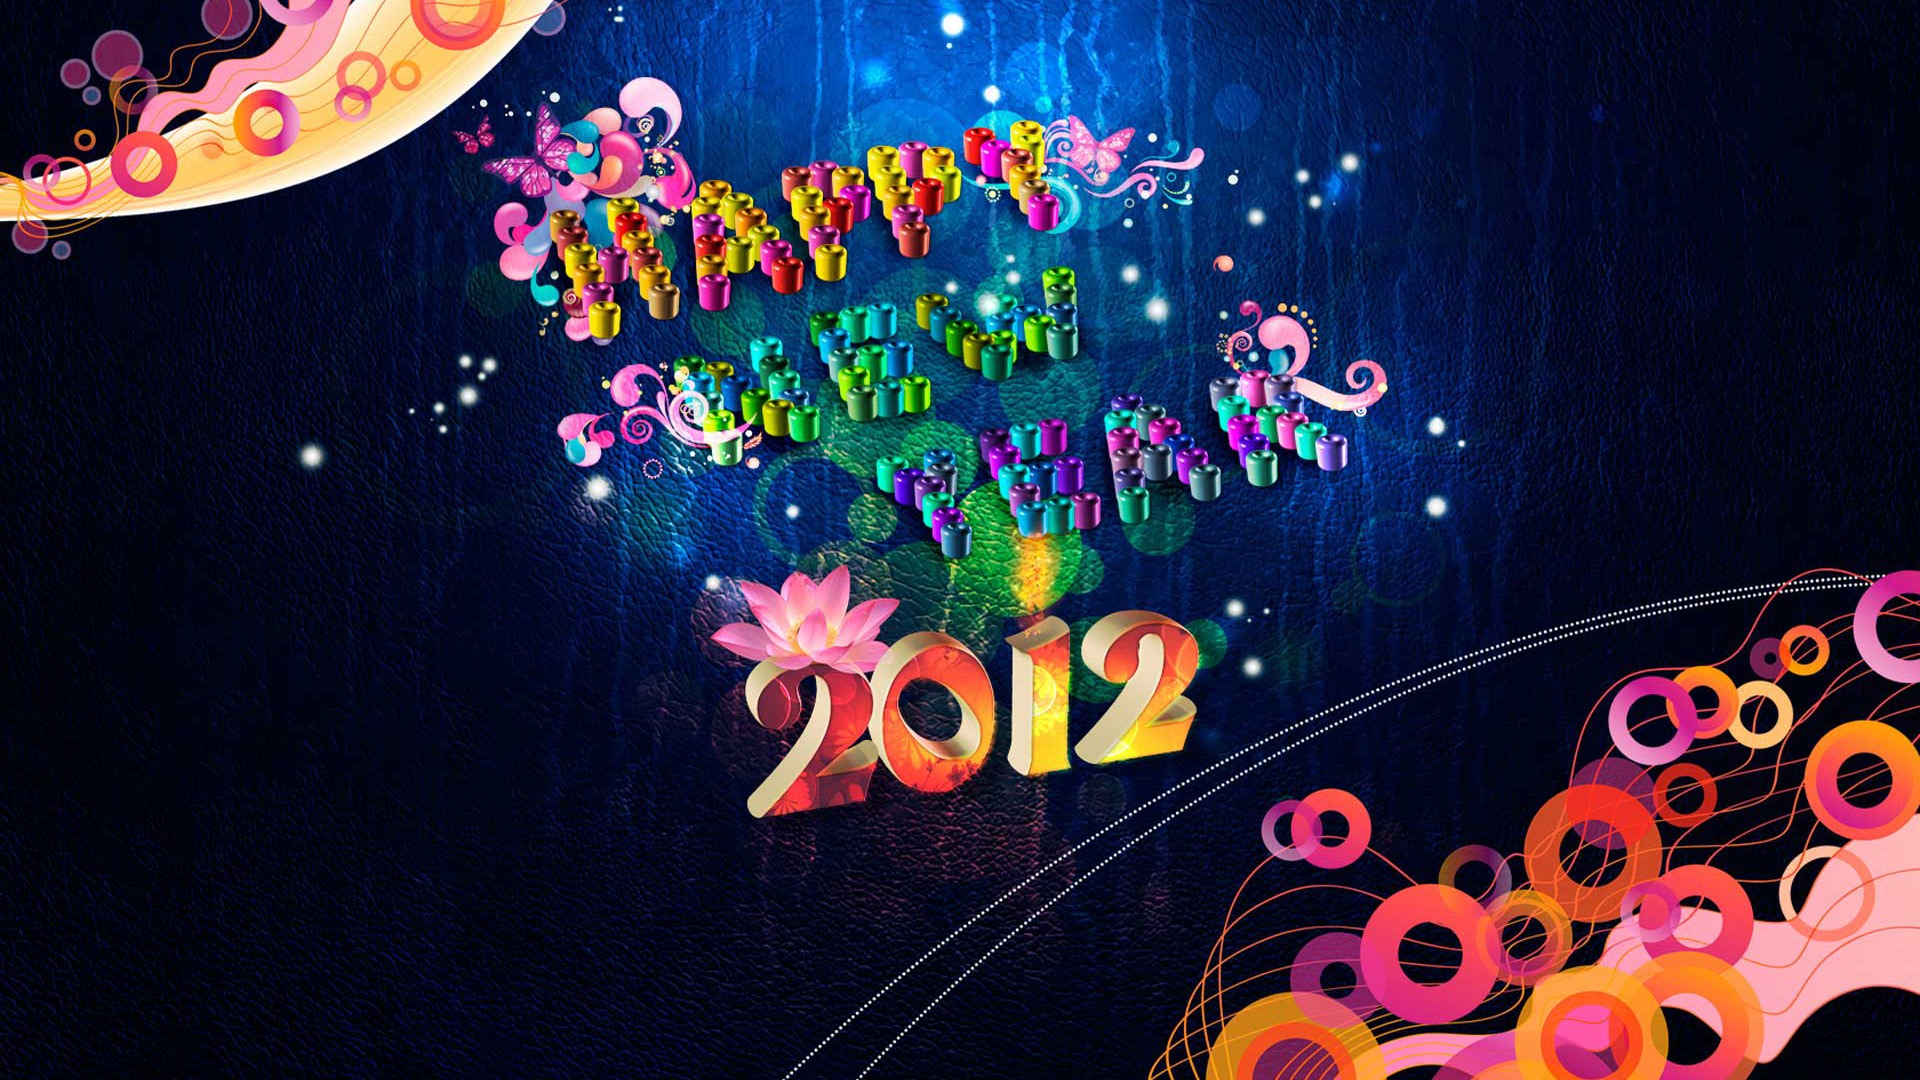 2012 New Year wallpapers (2) #3 - 1920x1080